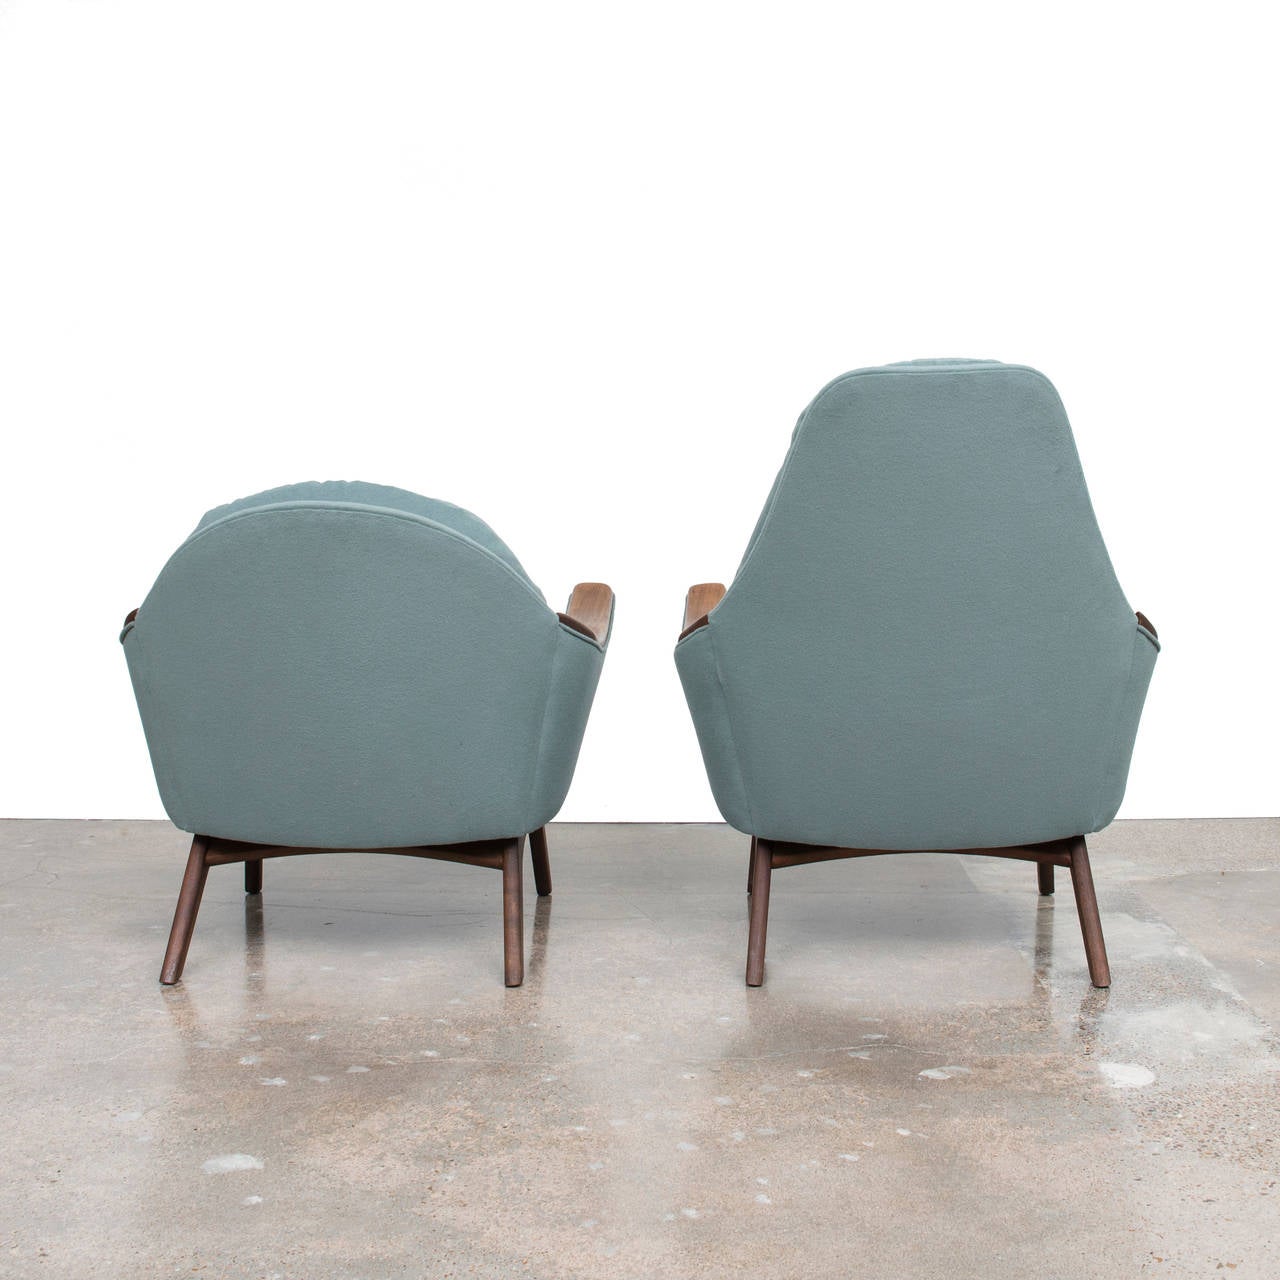 Mid-20th Century Adrian Pearsall Sleigh-Form Chairs (his & hers)